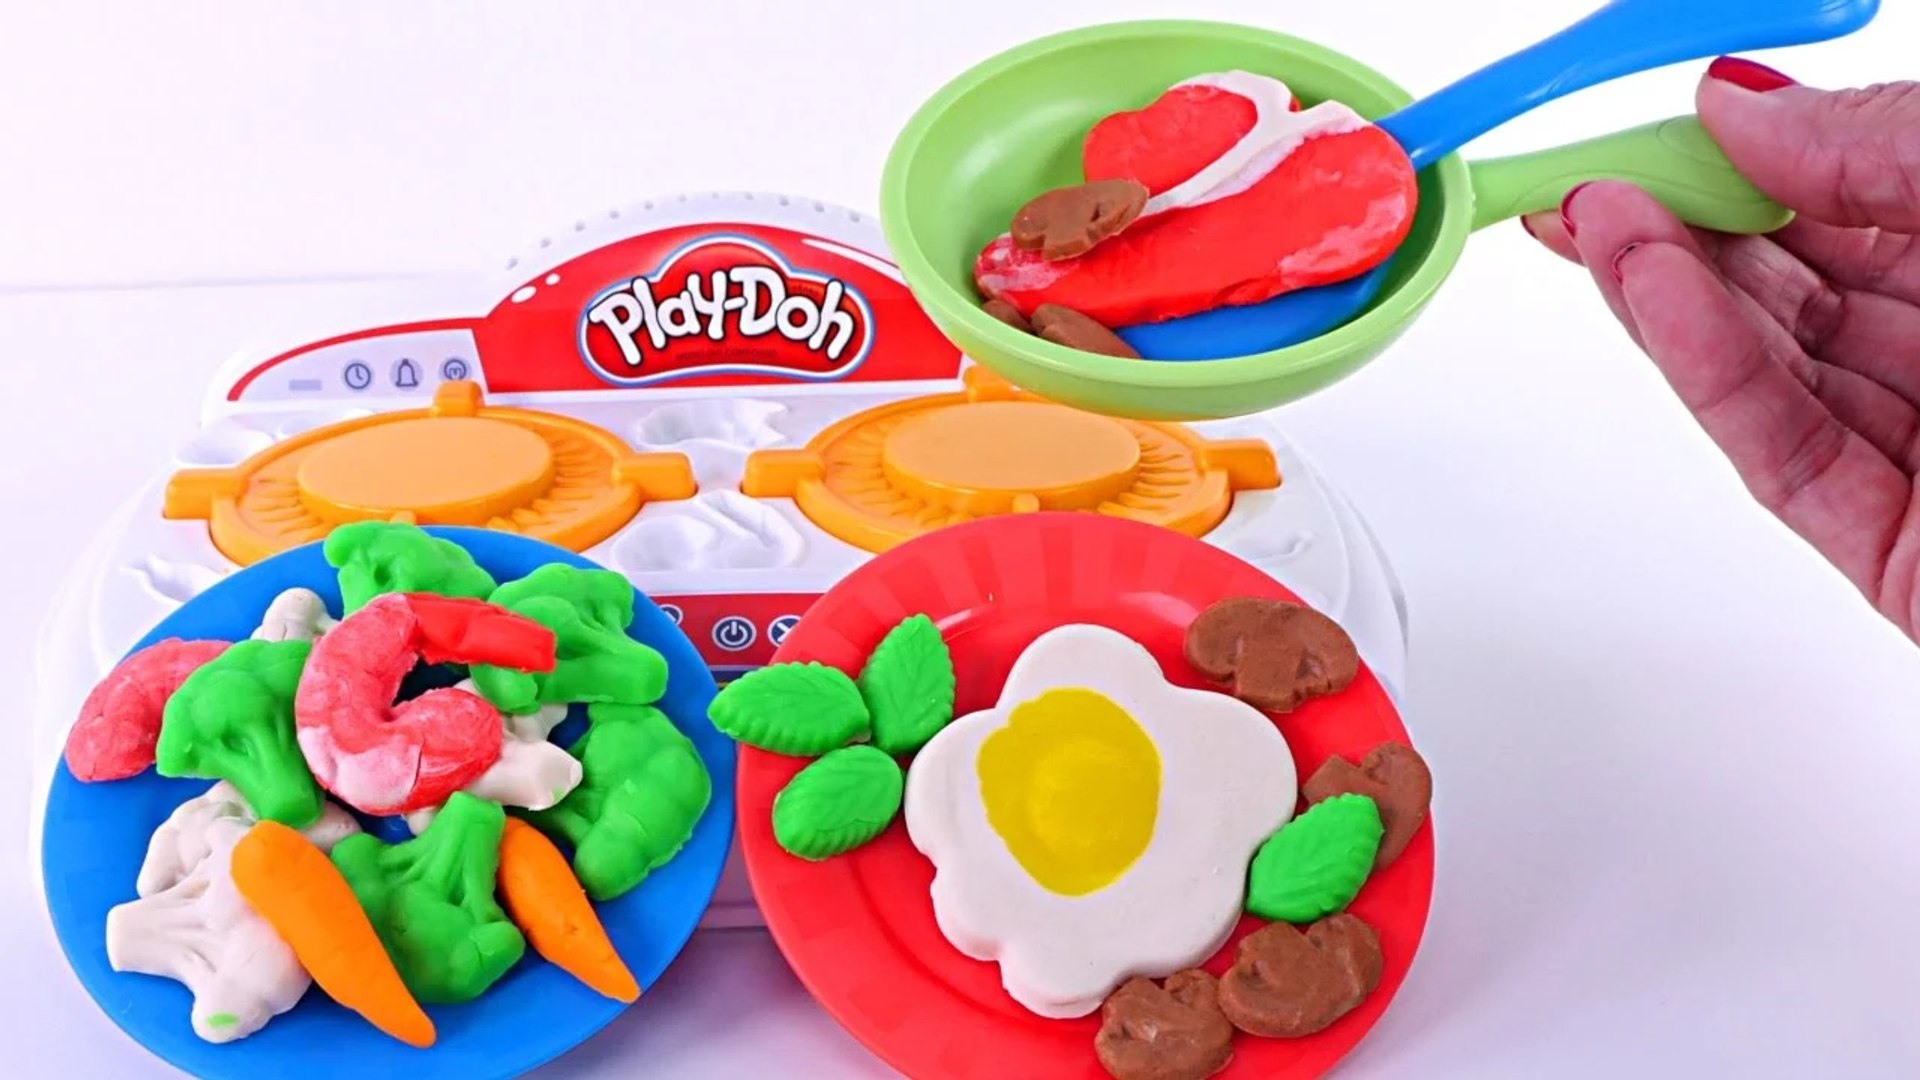 Play Doh Kitchen Creations Sizzlin' Stovetop Molds Set Fun Kids Toy PlayDoh Gift 